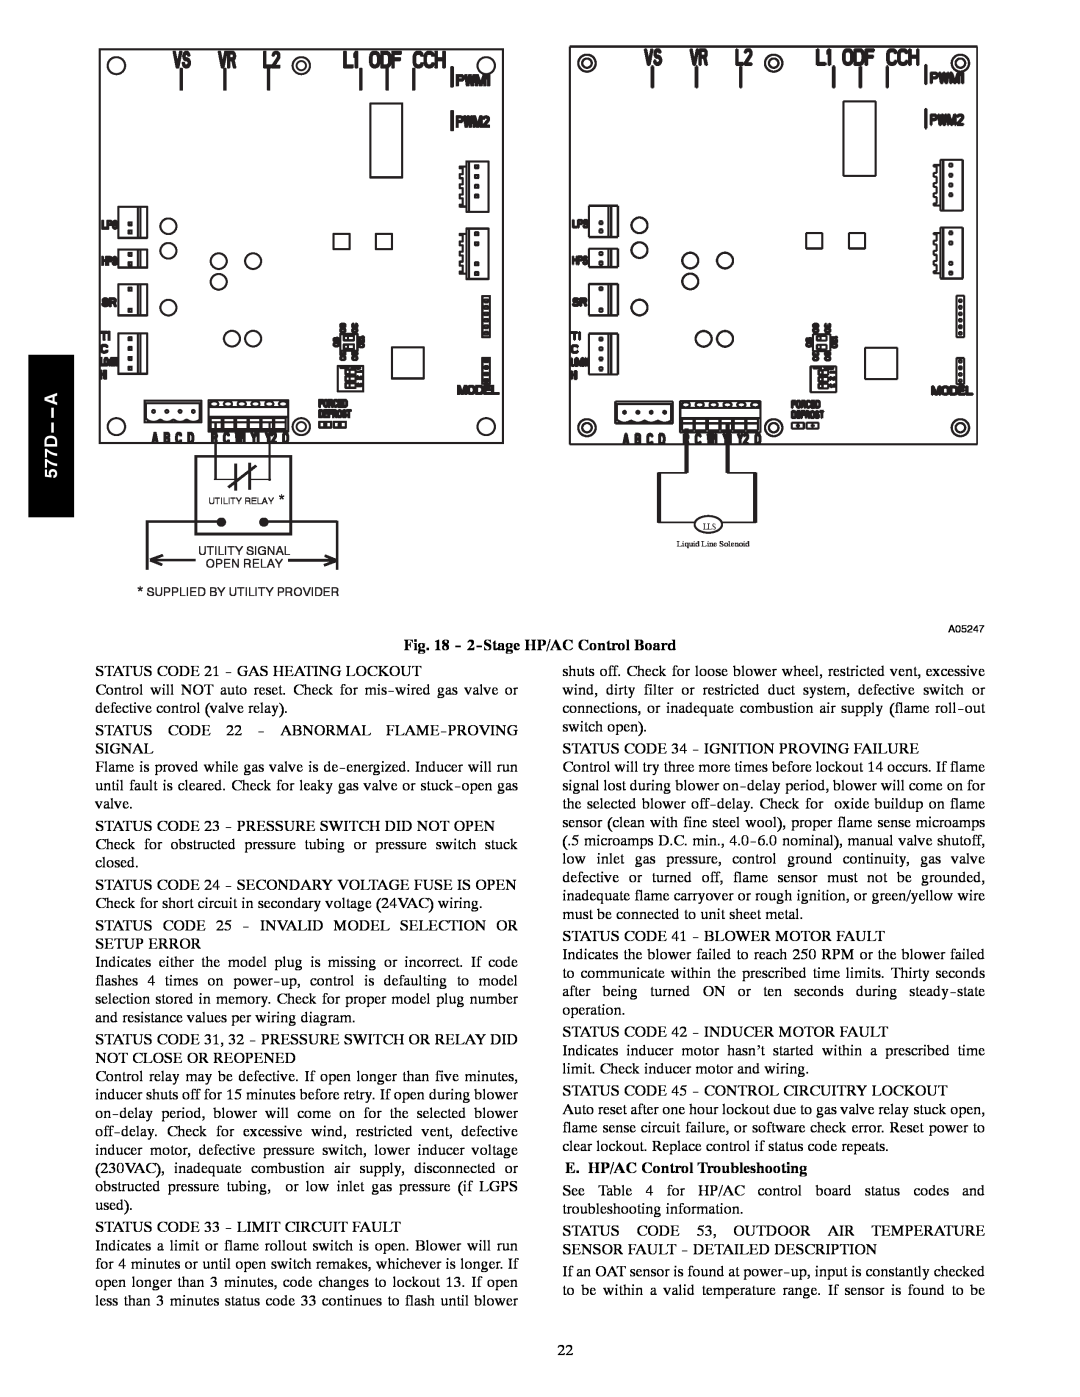 Bryant 577D----A installation instructions 2-StageHP/AC Control Board, E. HP/AC Control Troubleshooting, 577D-- --A 